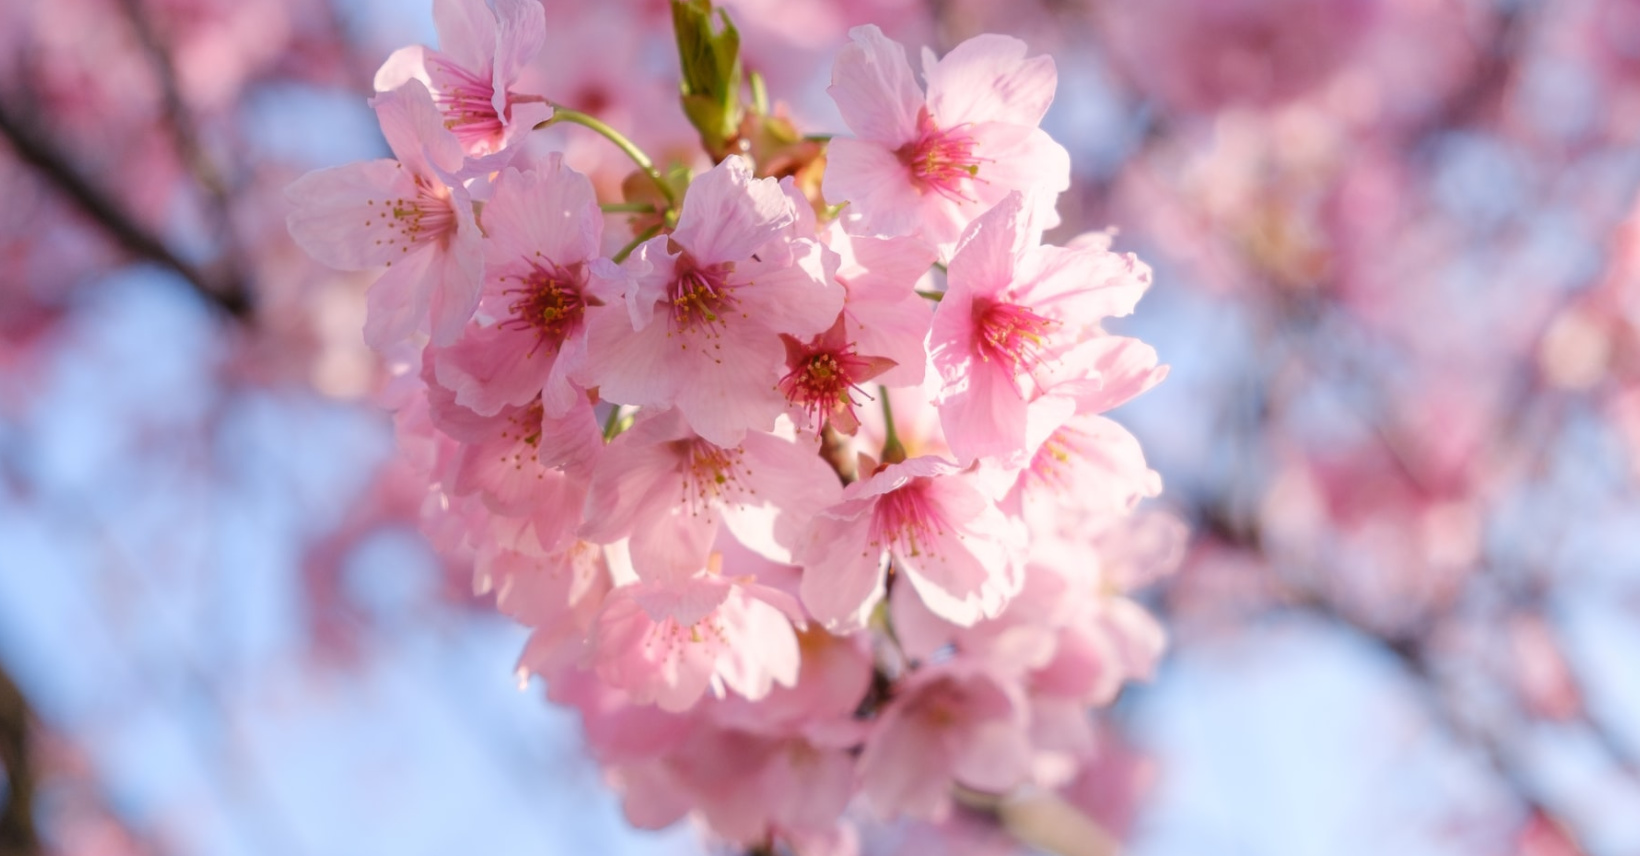 Best Places To See The Cherry Blossoms In DC